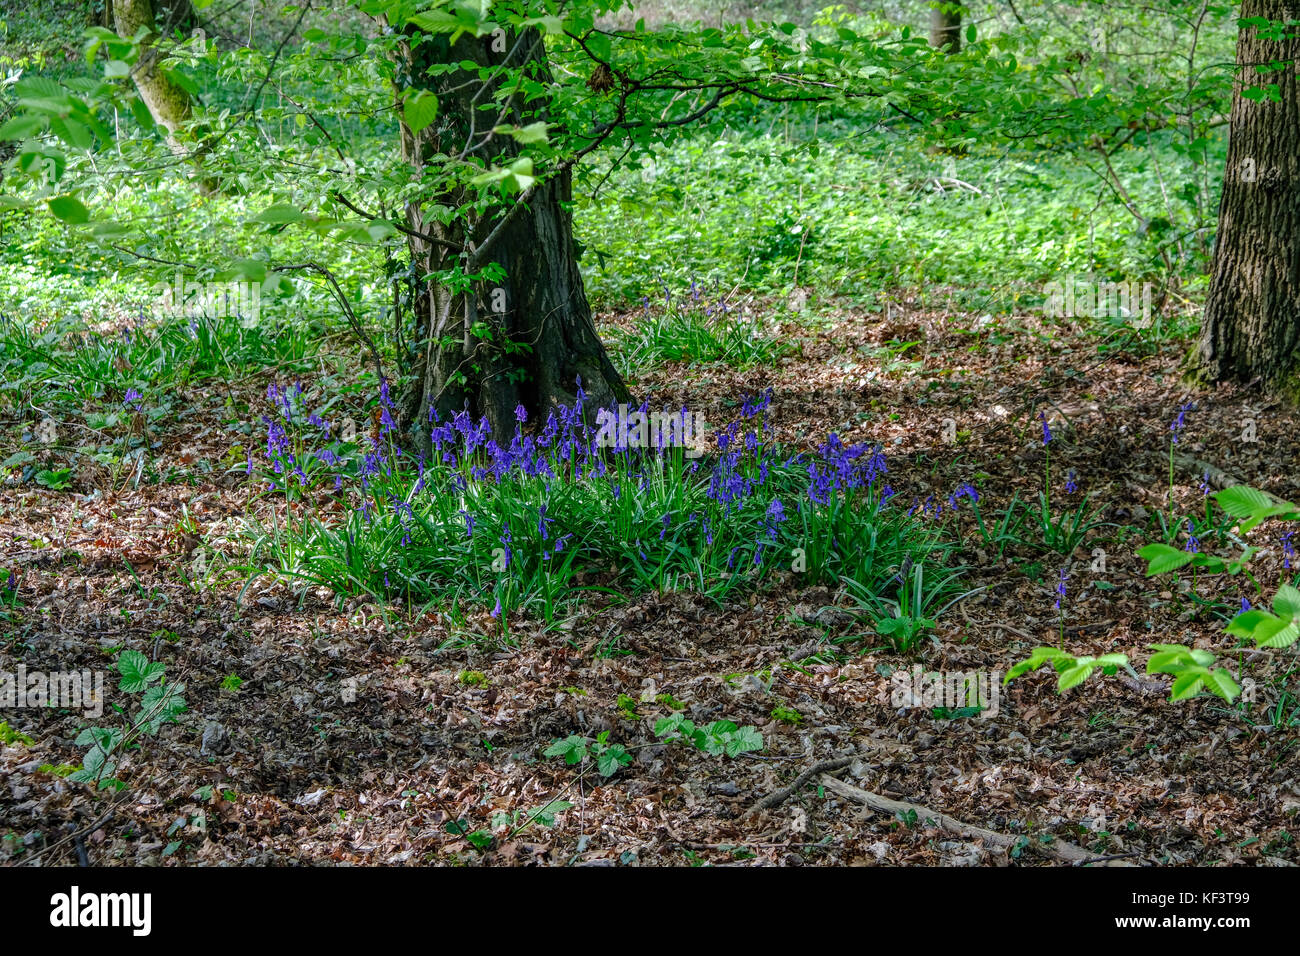 Bluebells in the wood in springtime.  Shot shows flowers agains undergrowth. Stock Photo